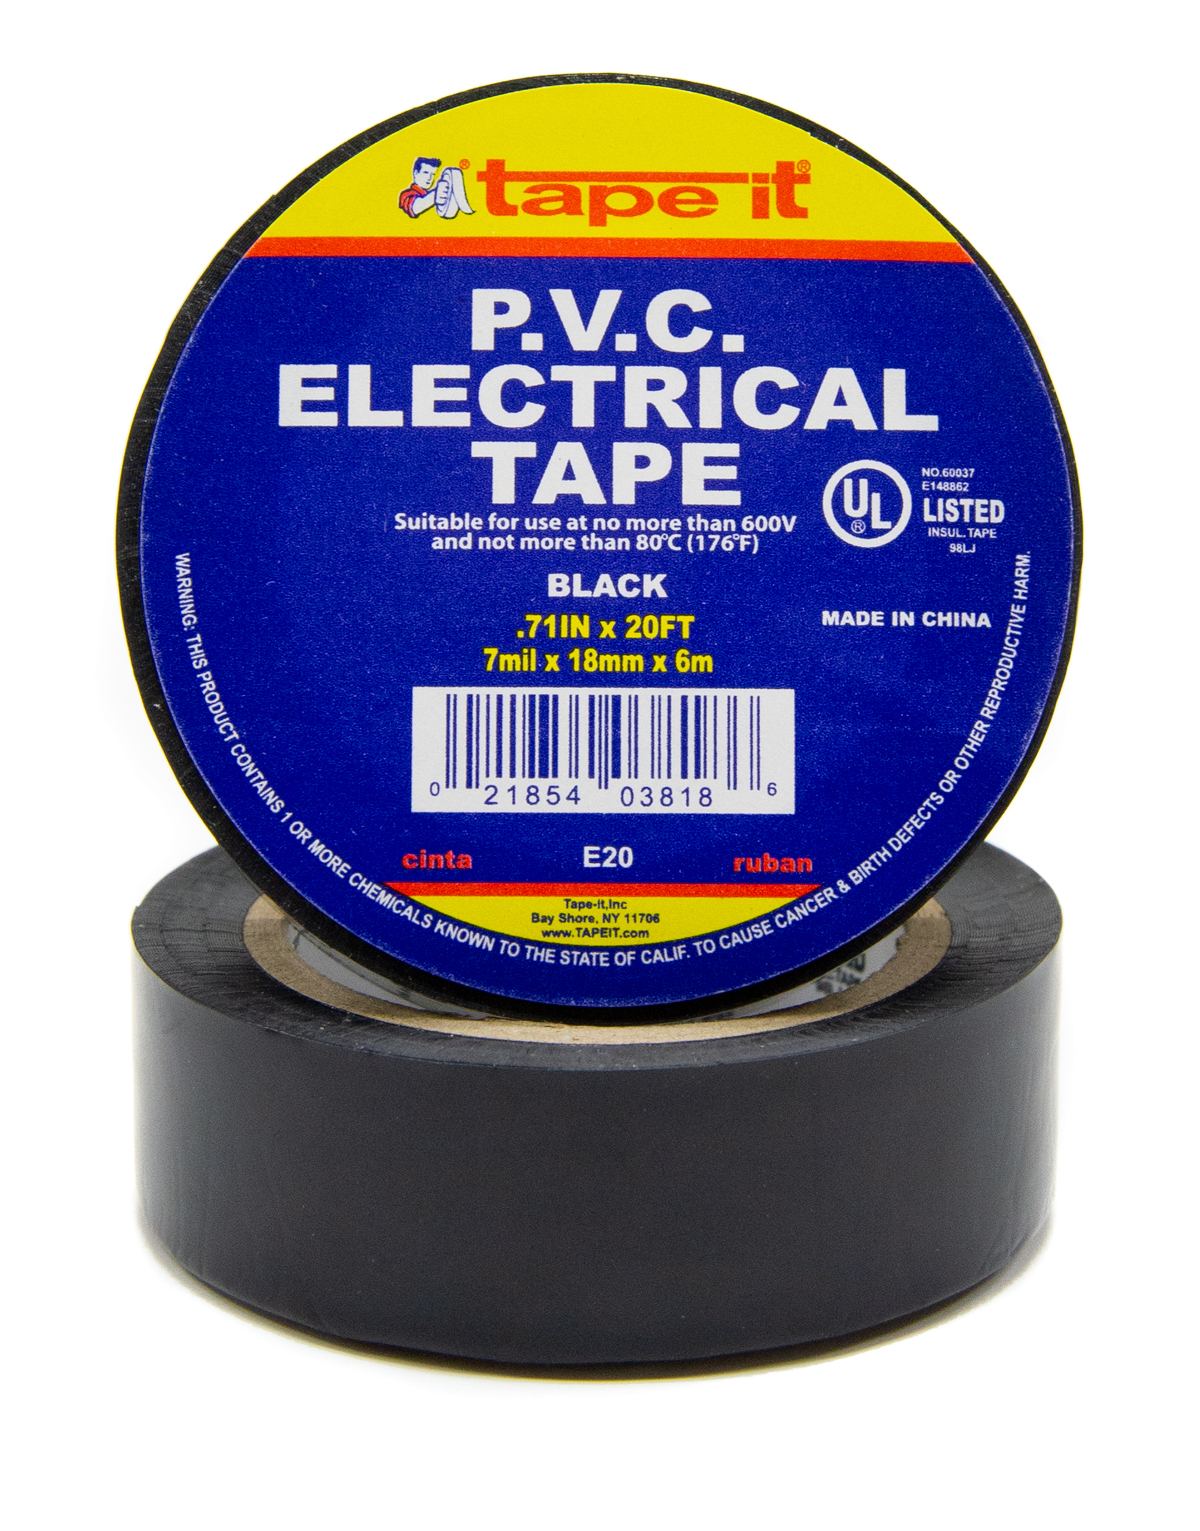 Wholesale Electrical Tape - Black - .71